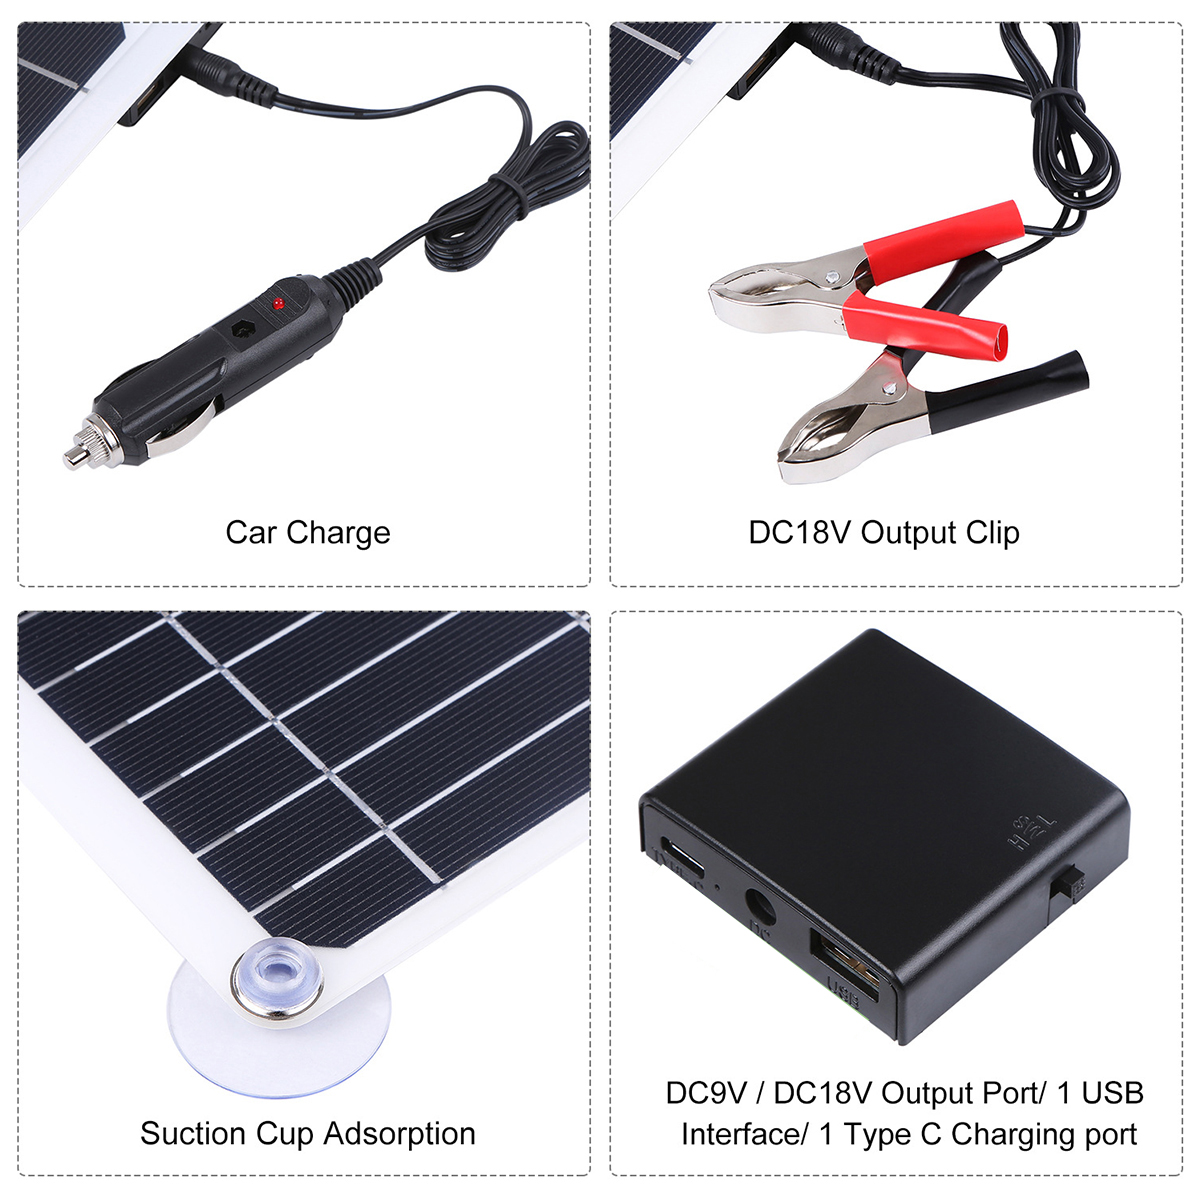 DC-200W-18V-Solar-Panel-Kit-Double-USB-Port-Controller-Power-Bank-Portable-Battery-Charger-for-Outdo-1812074-7